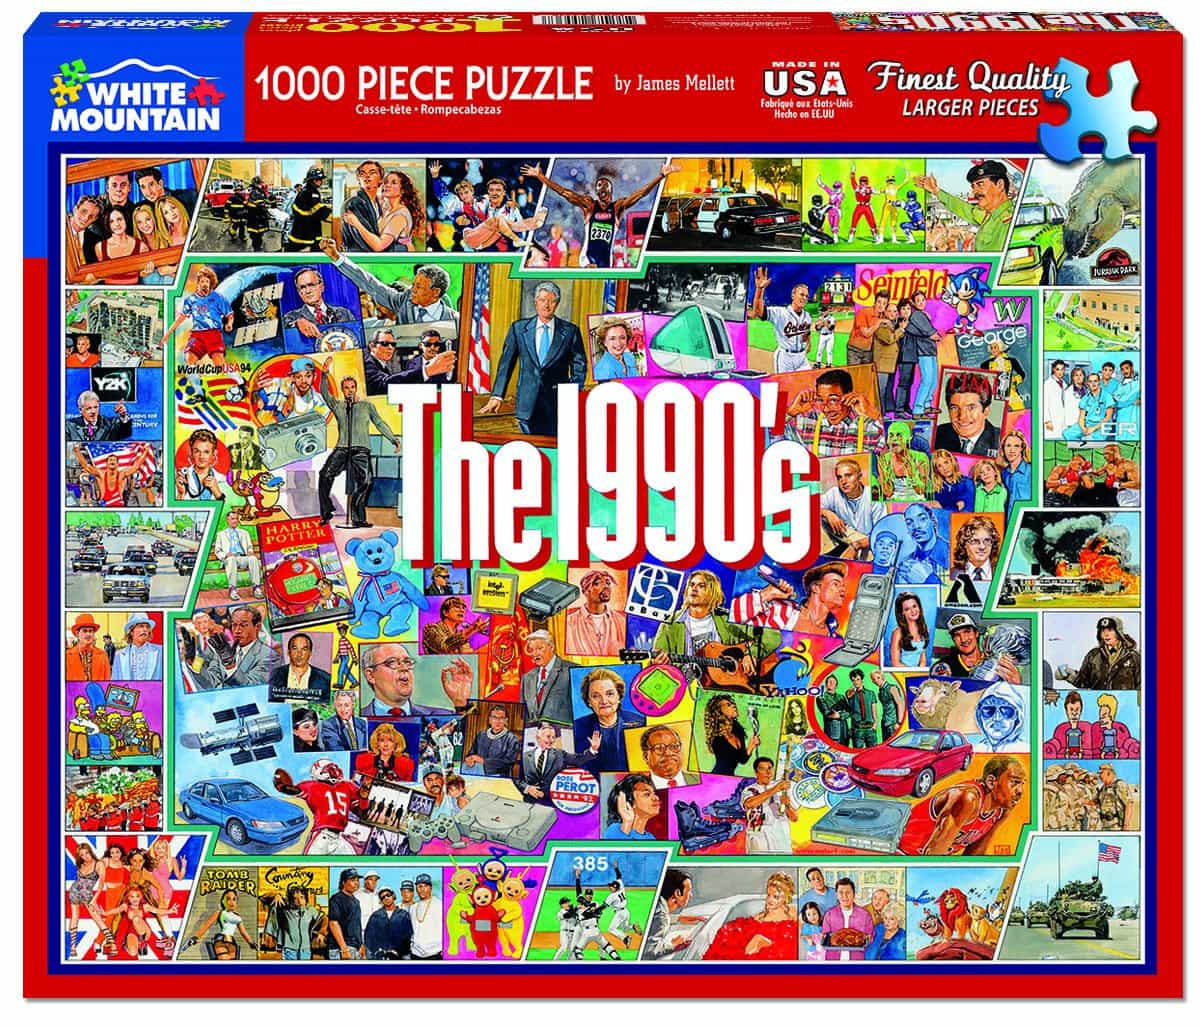 The Nineties 1000 Piece Jigsaw Puzzle